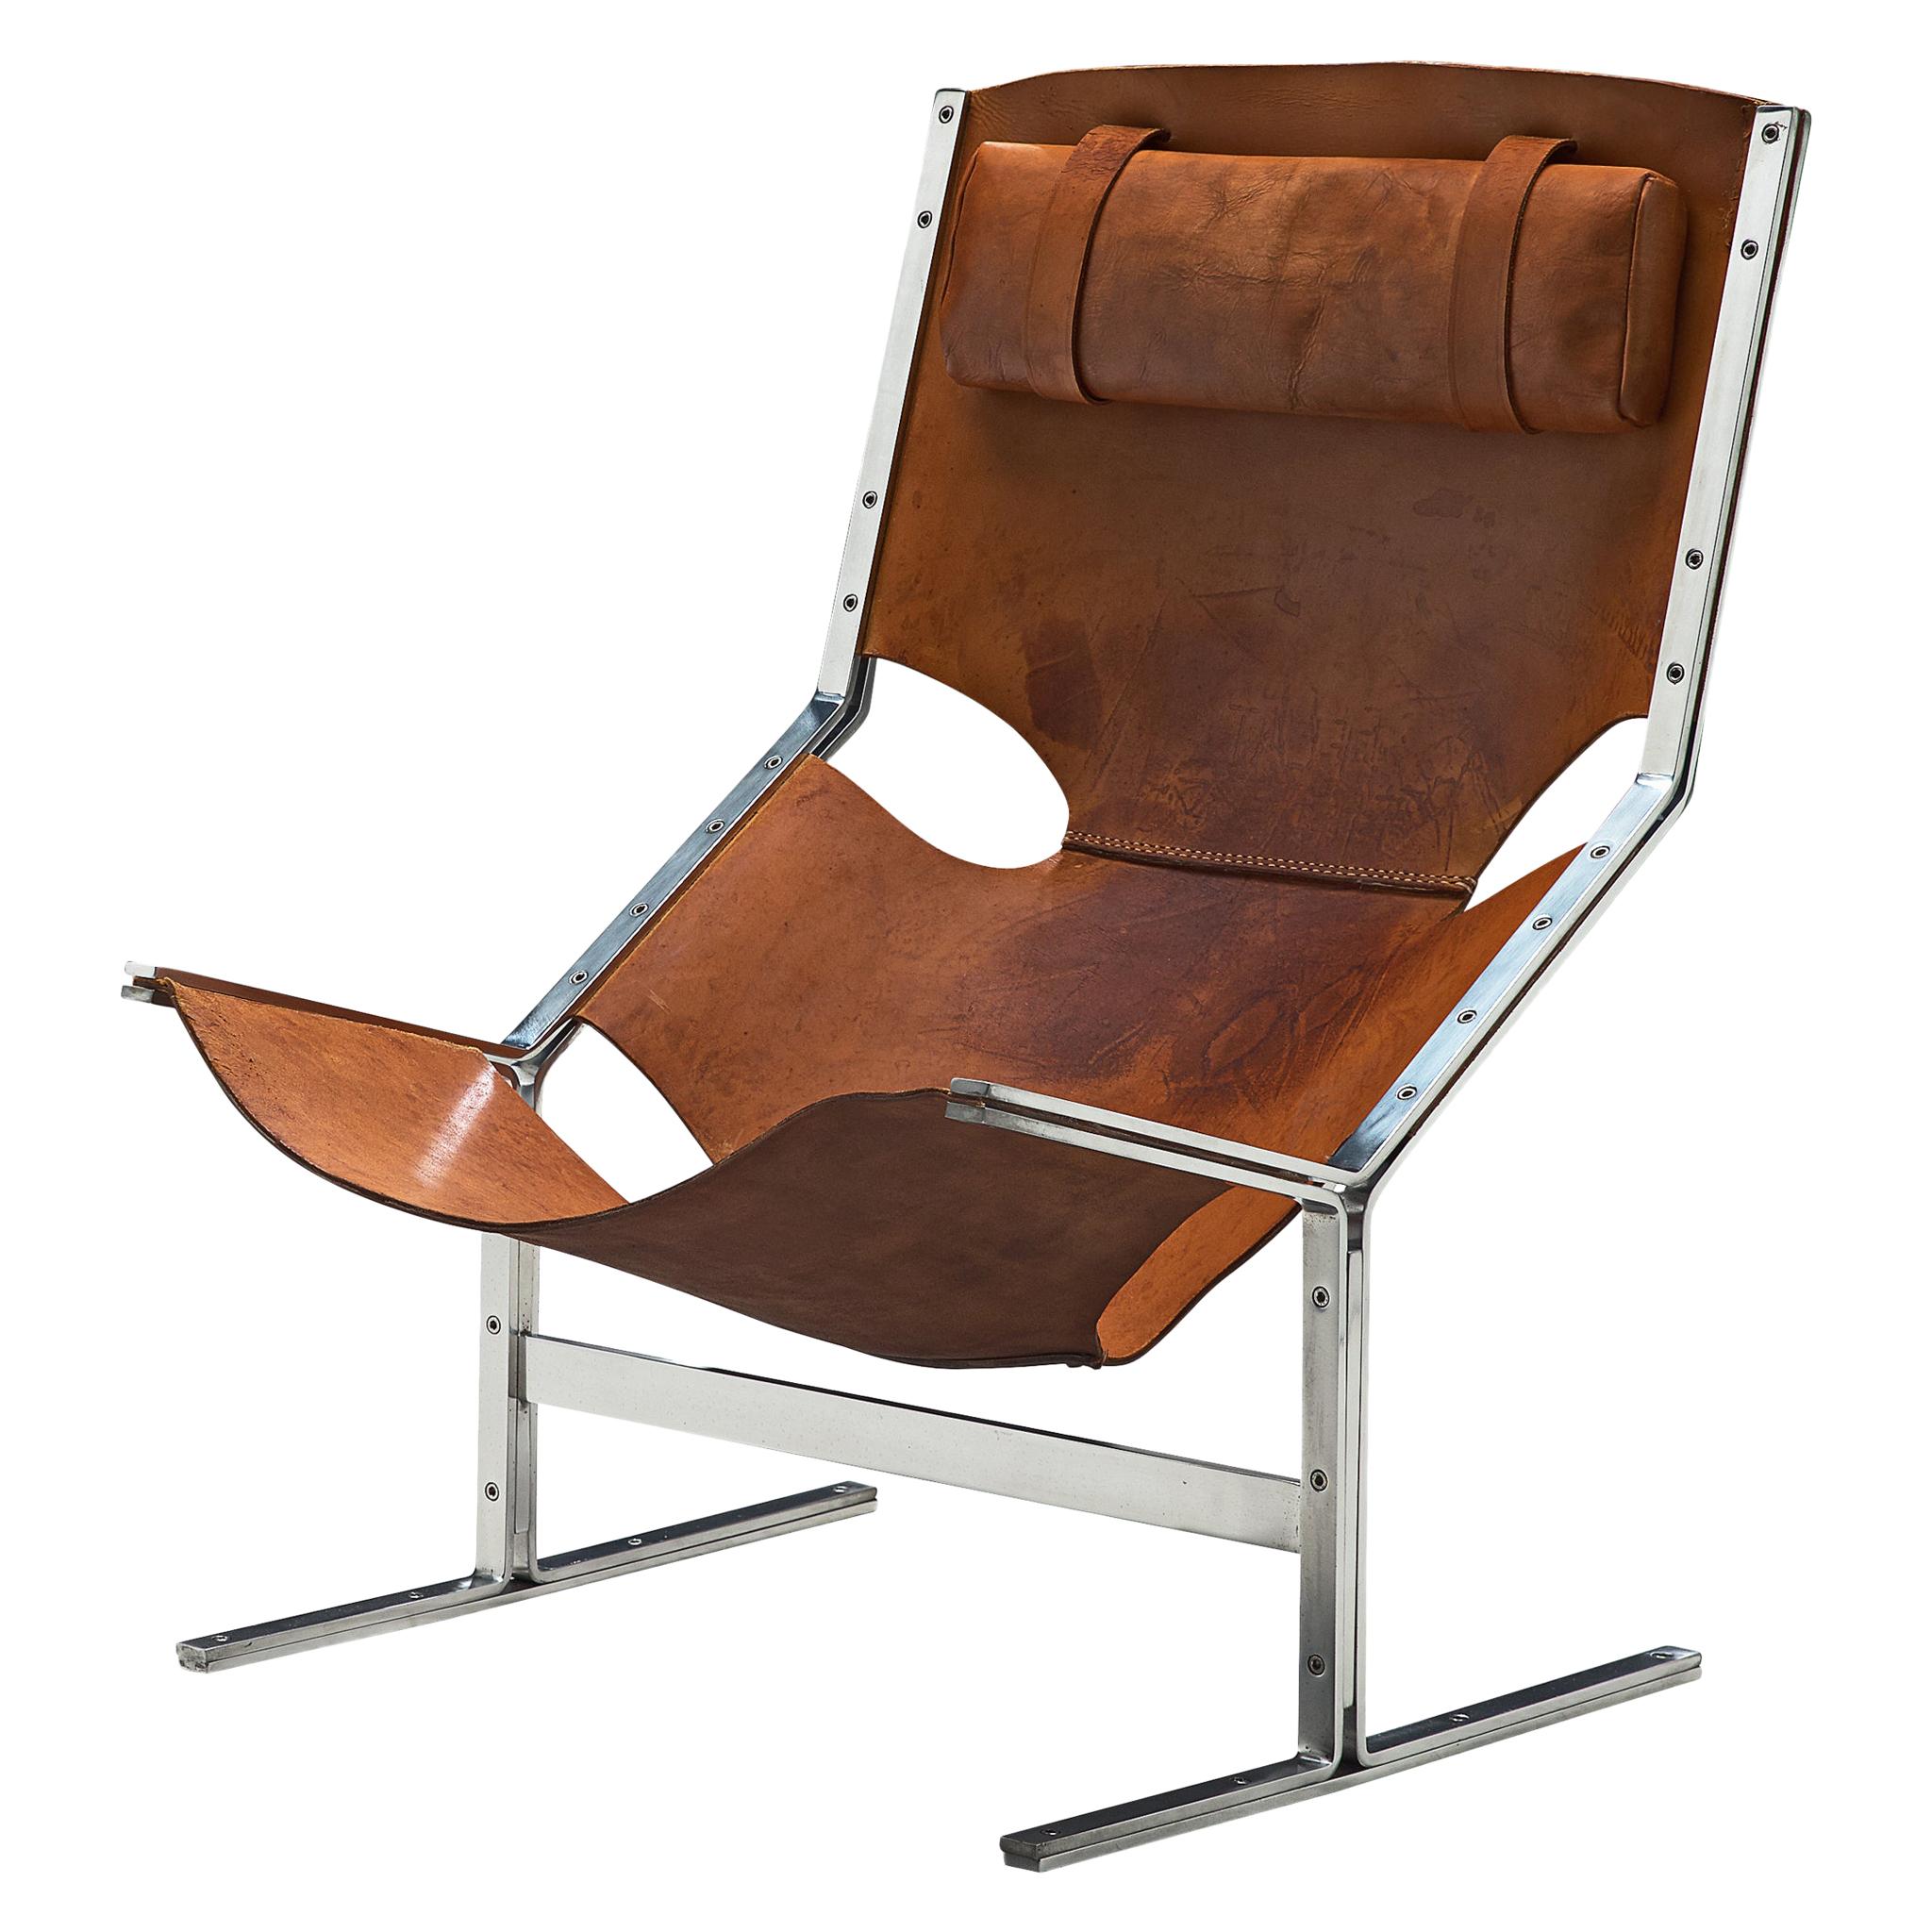 Dutch Sling Lounge Chair in Cognac Leather and Steel by Abraham Polak